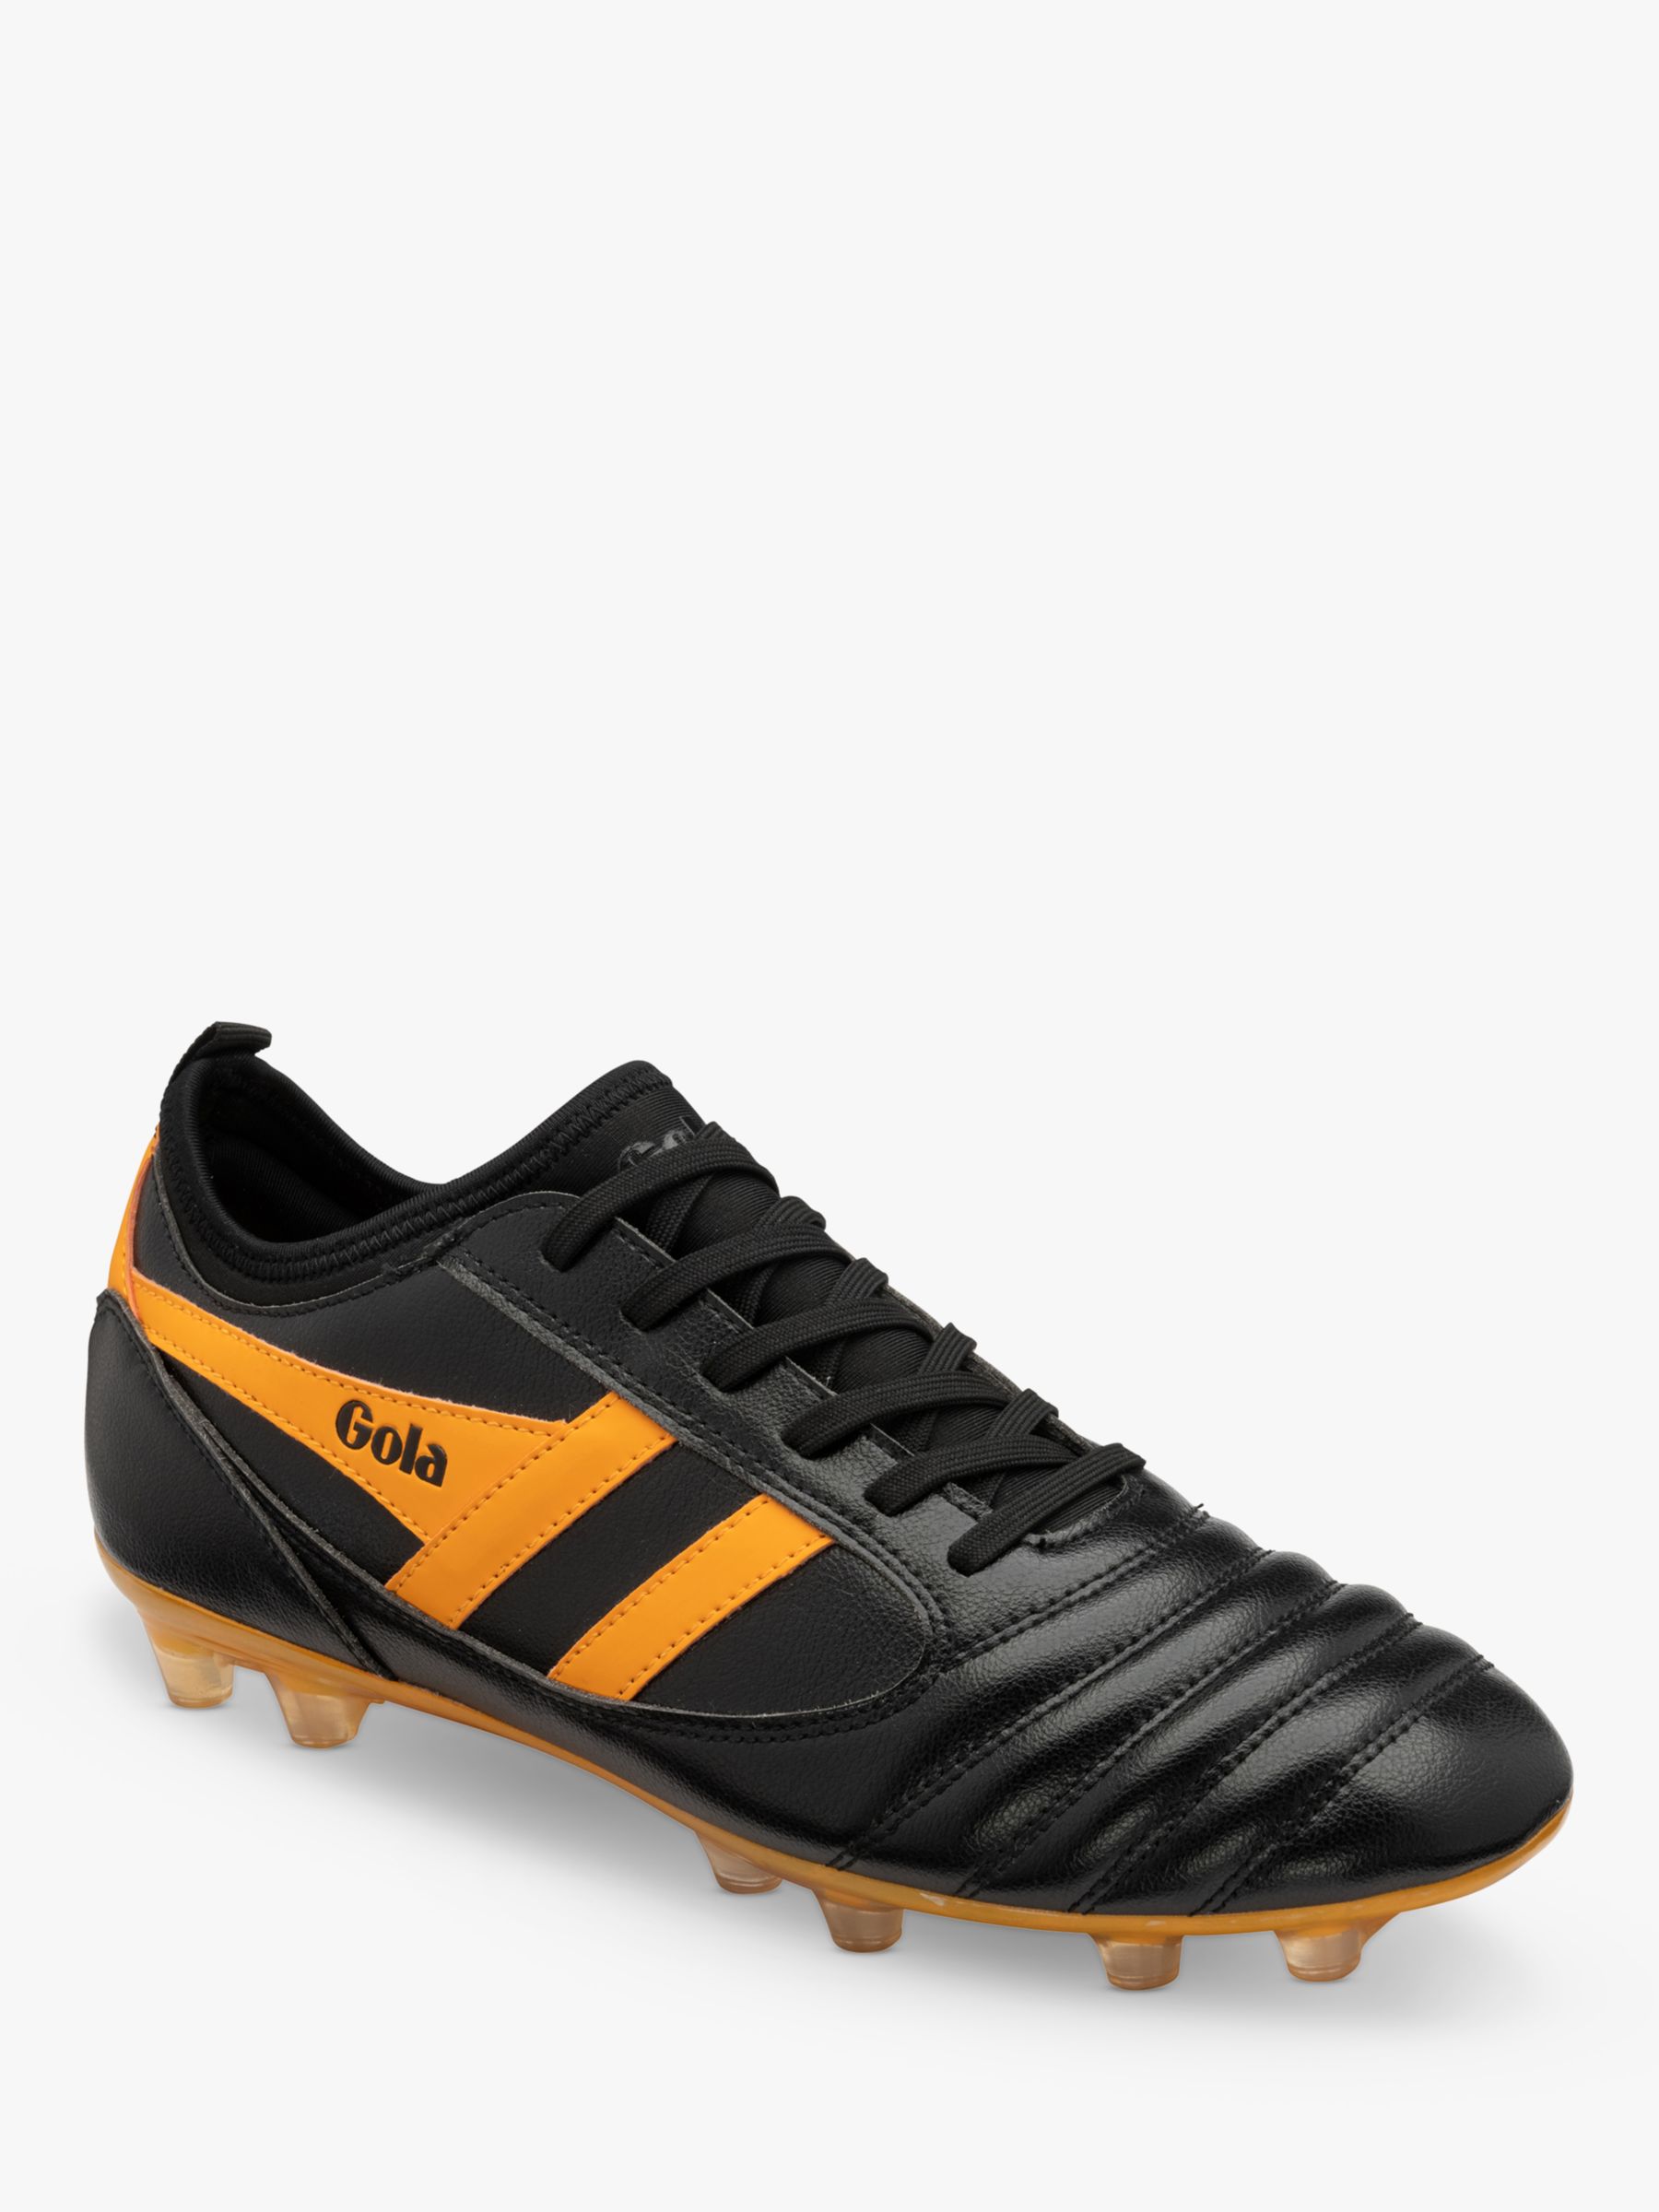 Buy Gola Performance Ceptor MLD Pro Football Boots Online at johnlewis.com